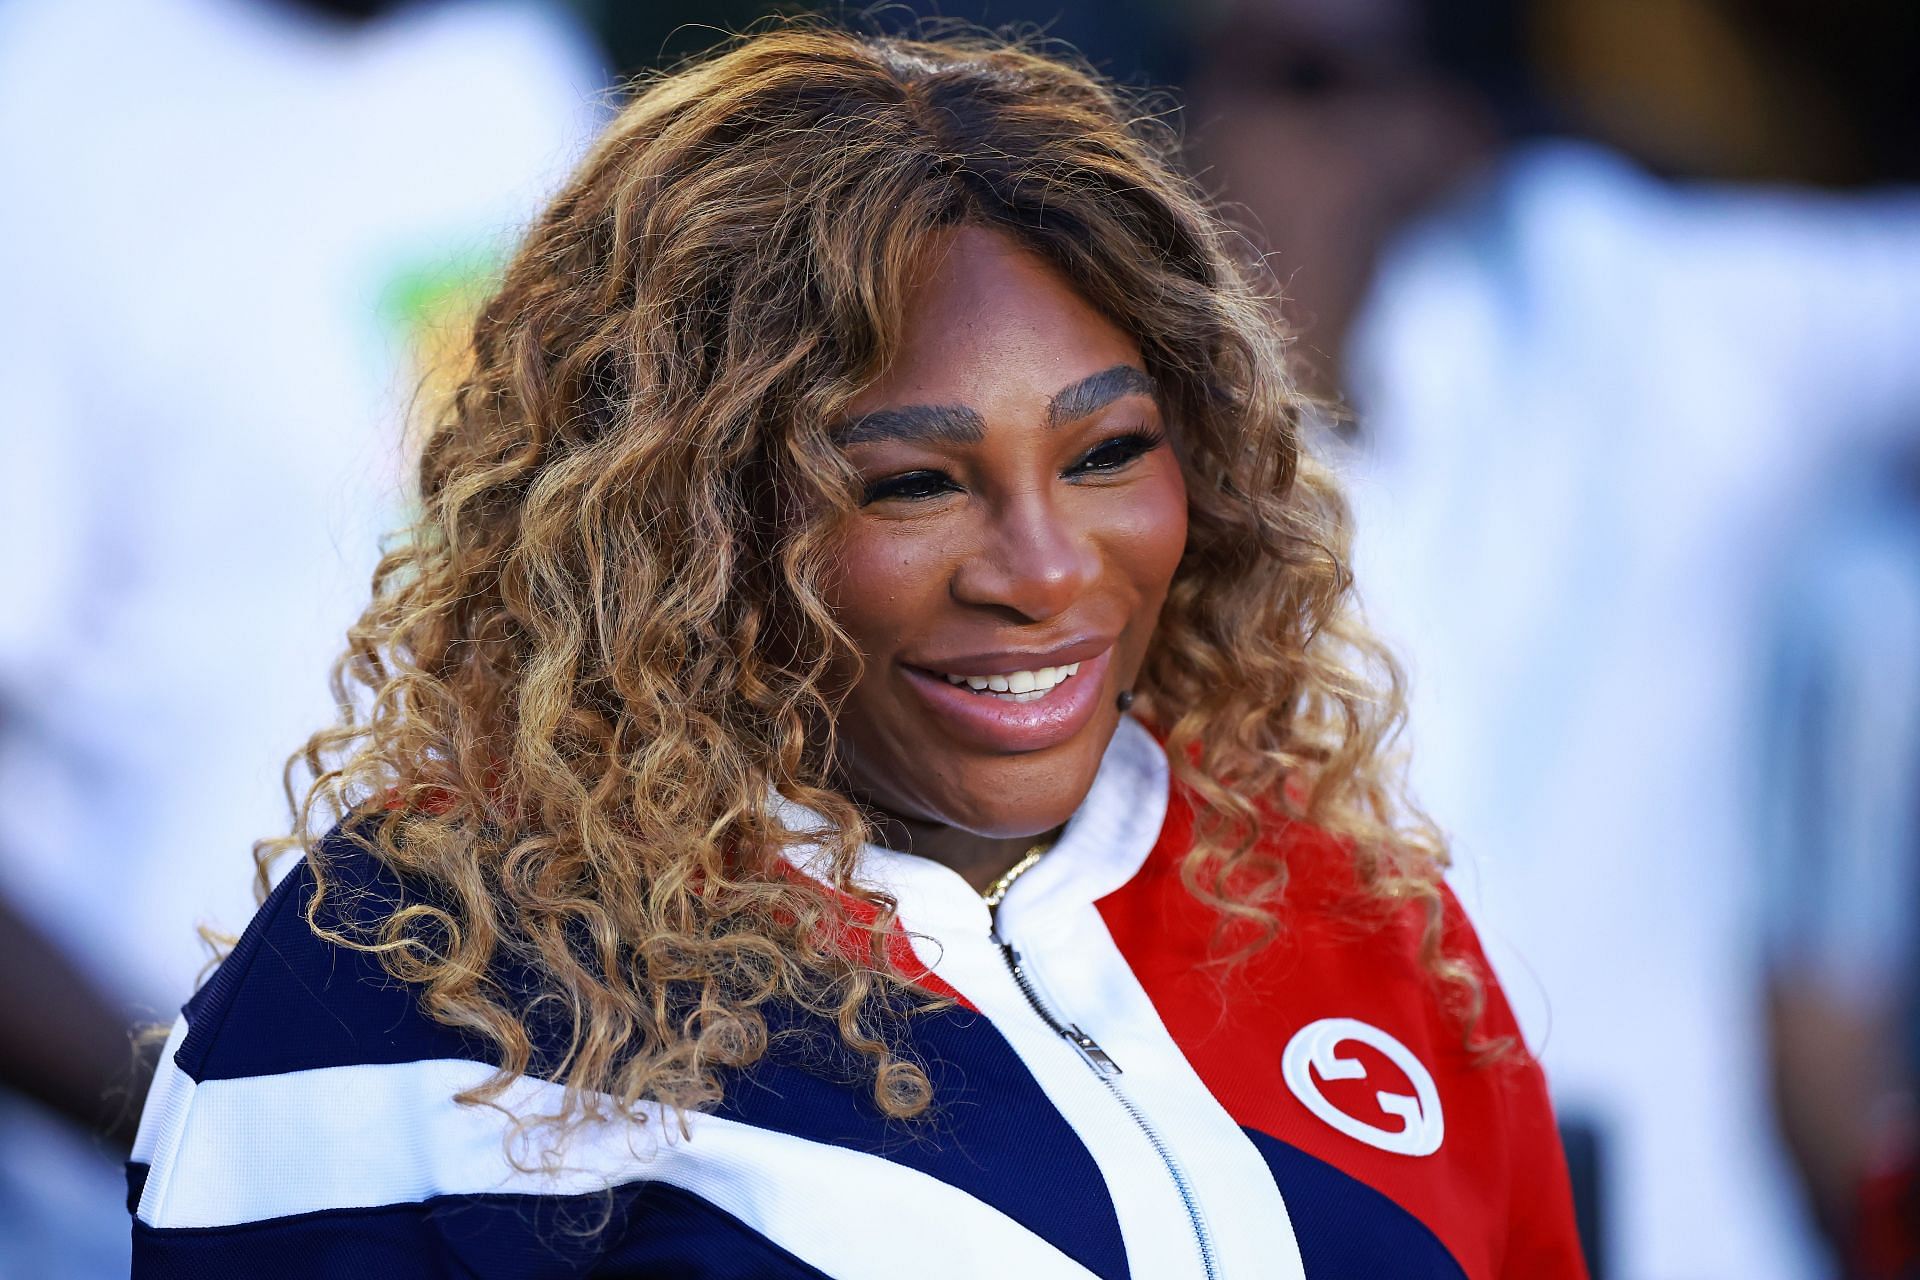 Serena Williams is good friends with Grigor Dimitrov these days